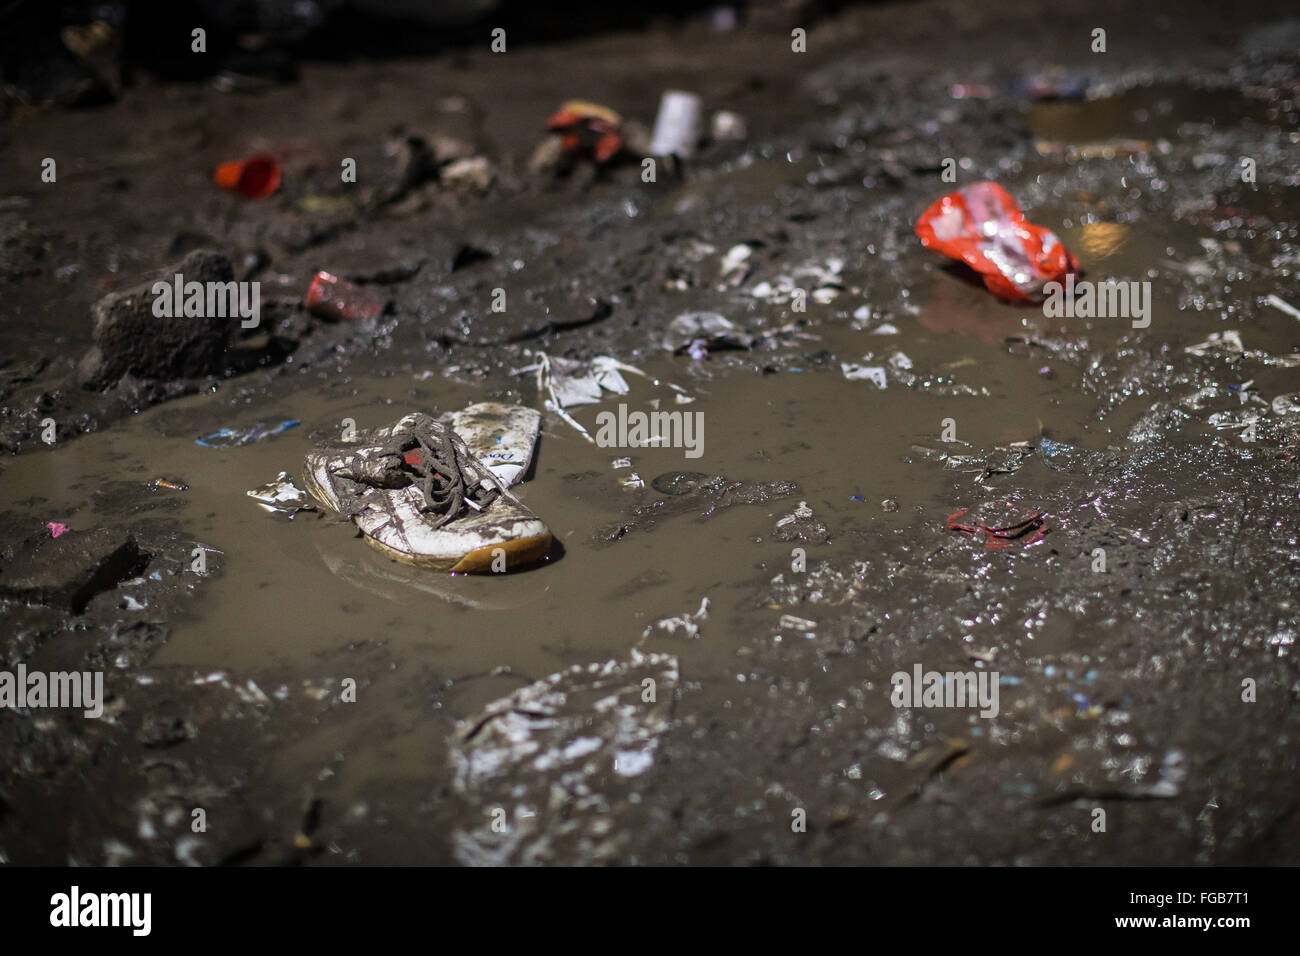 A single trainer sits alongside rubbish in a muddy puddle in the Calais Refugee Camp, also know as the Jungle. Stock Photo